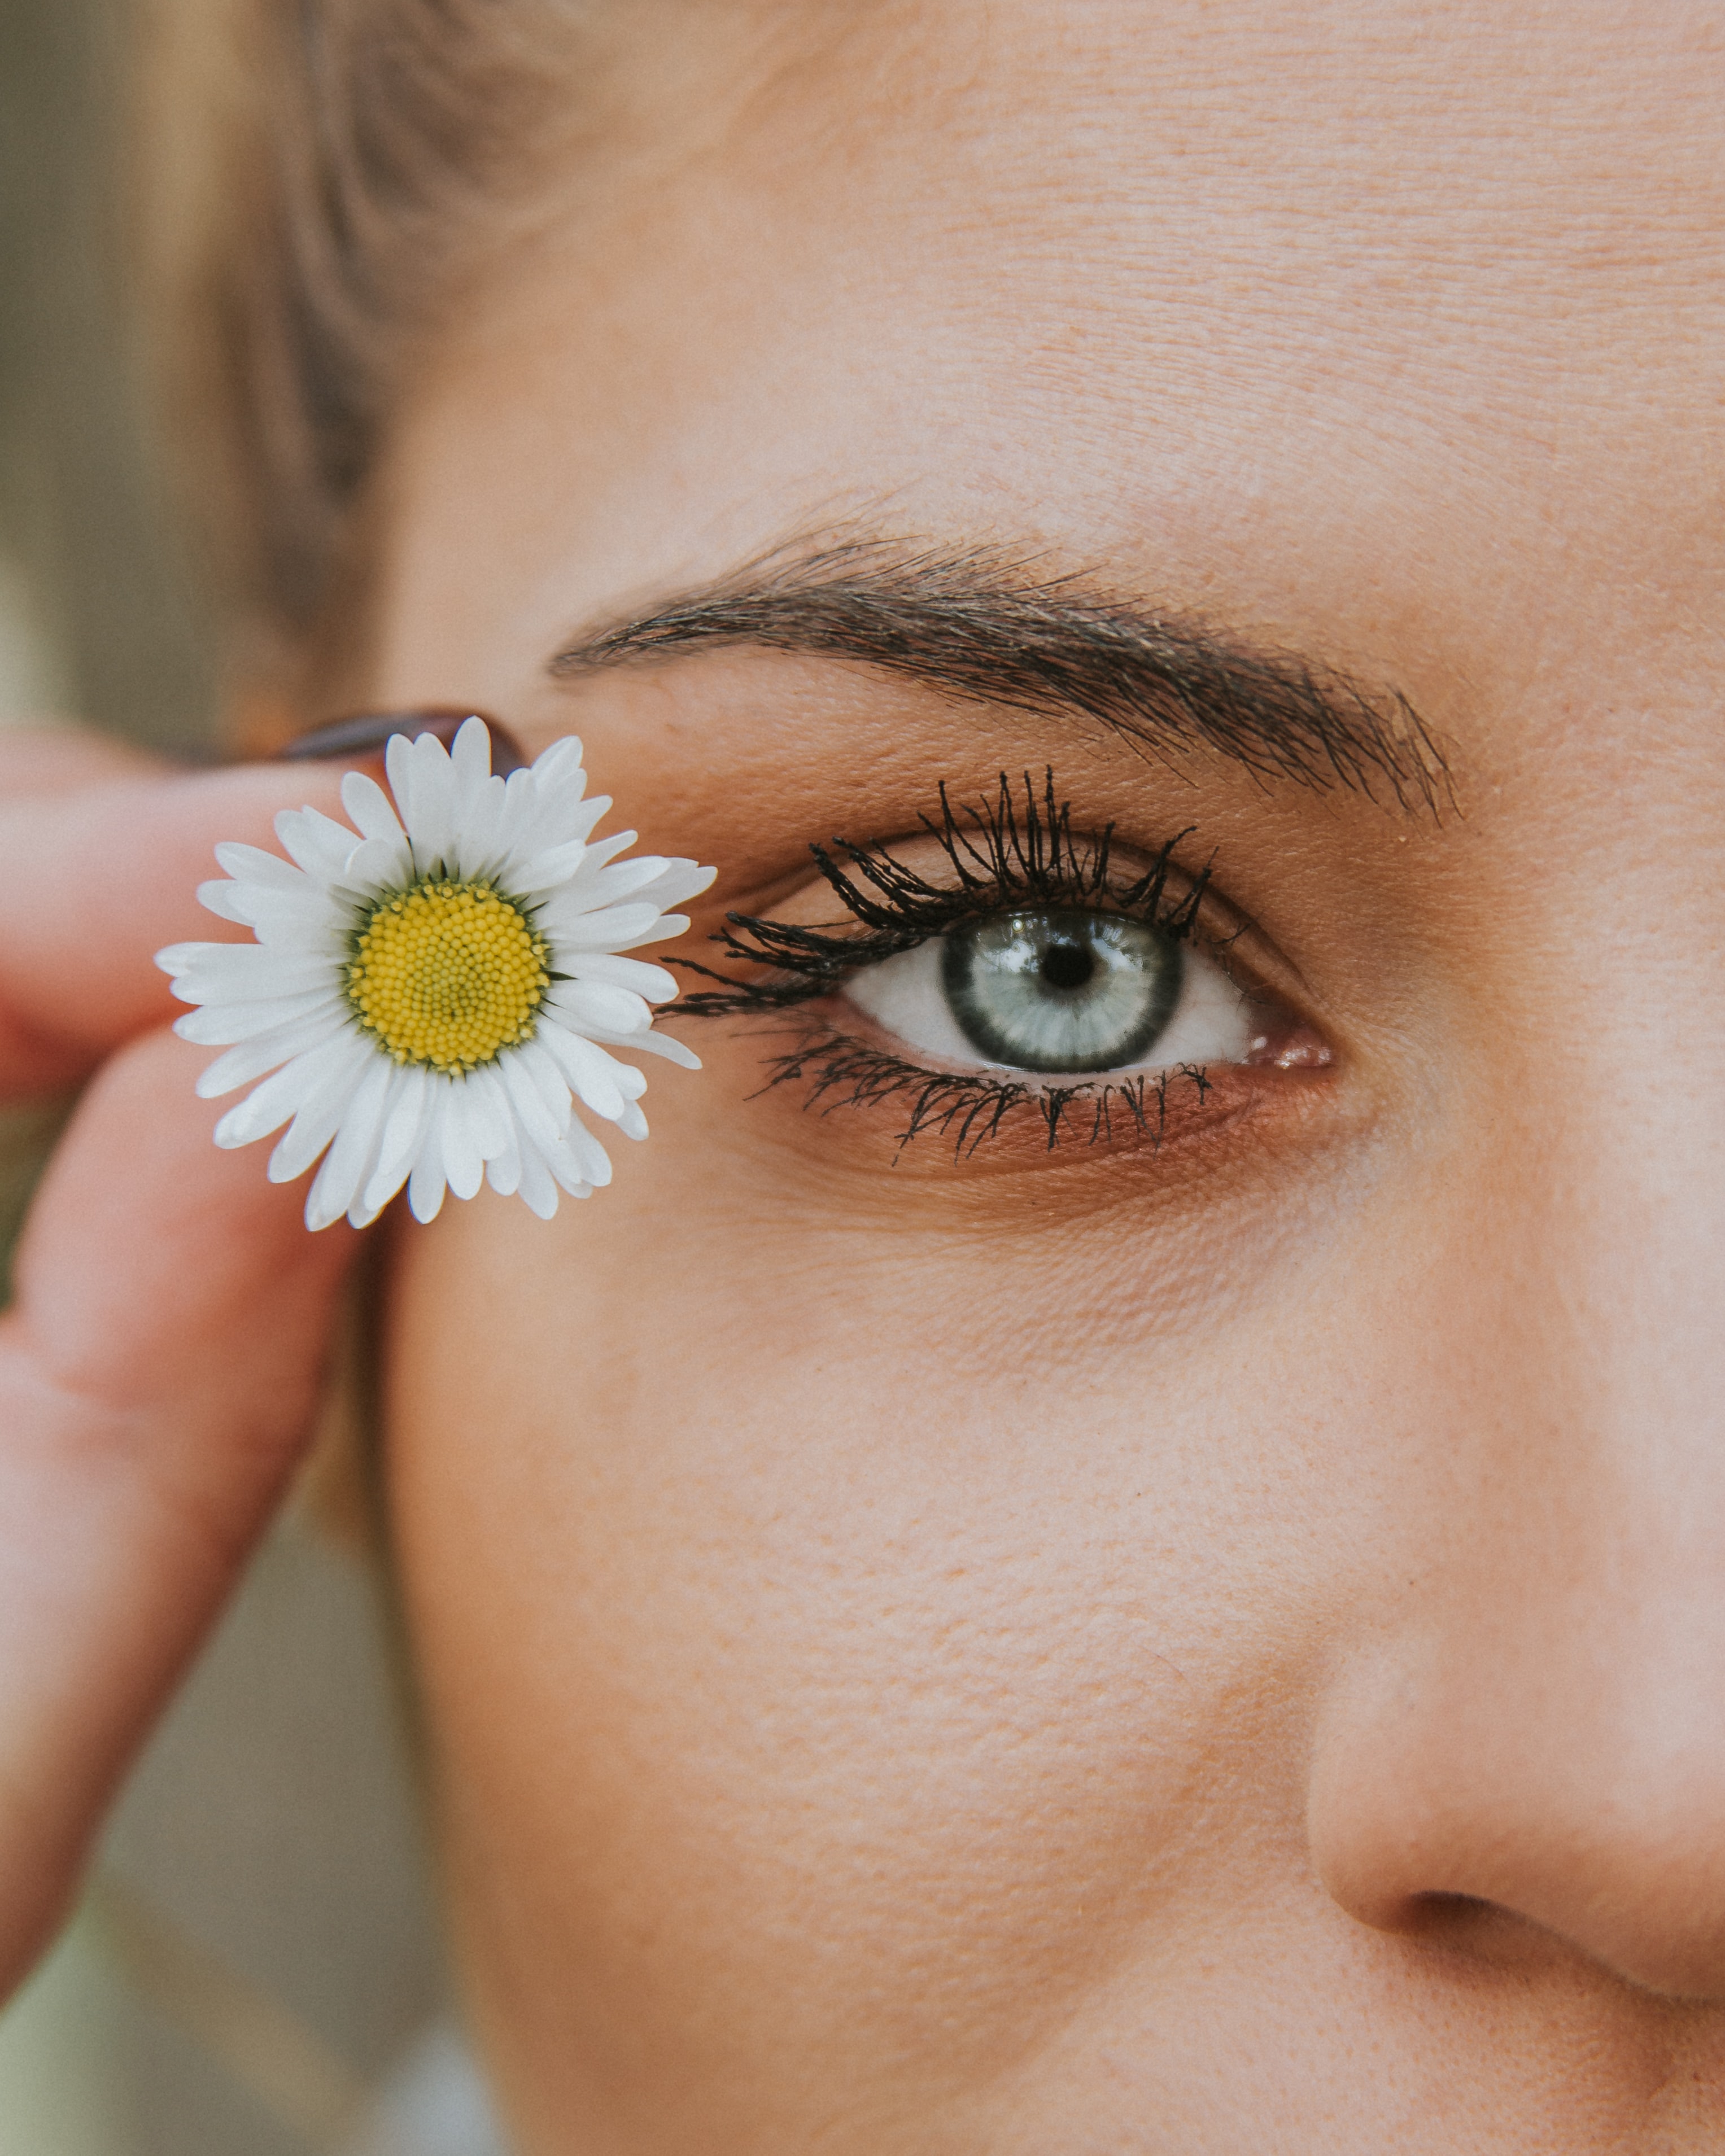 Woman holding a daisy next to her blue eye